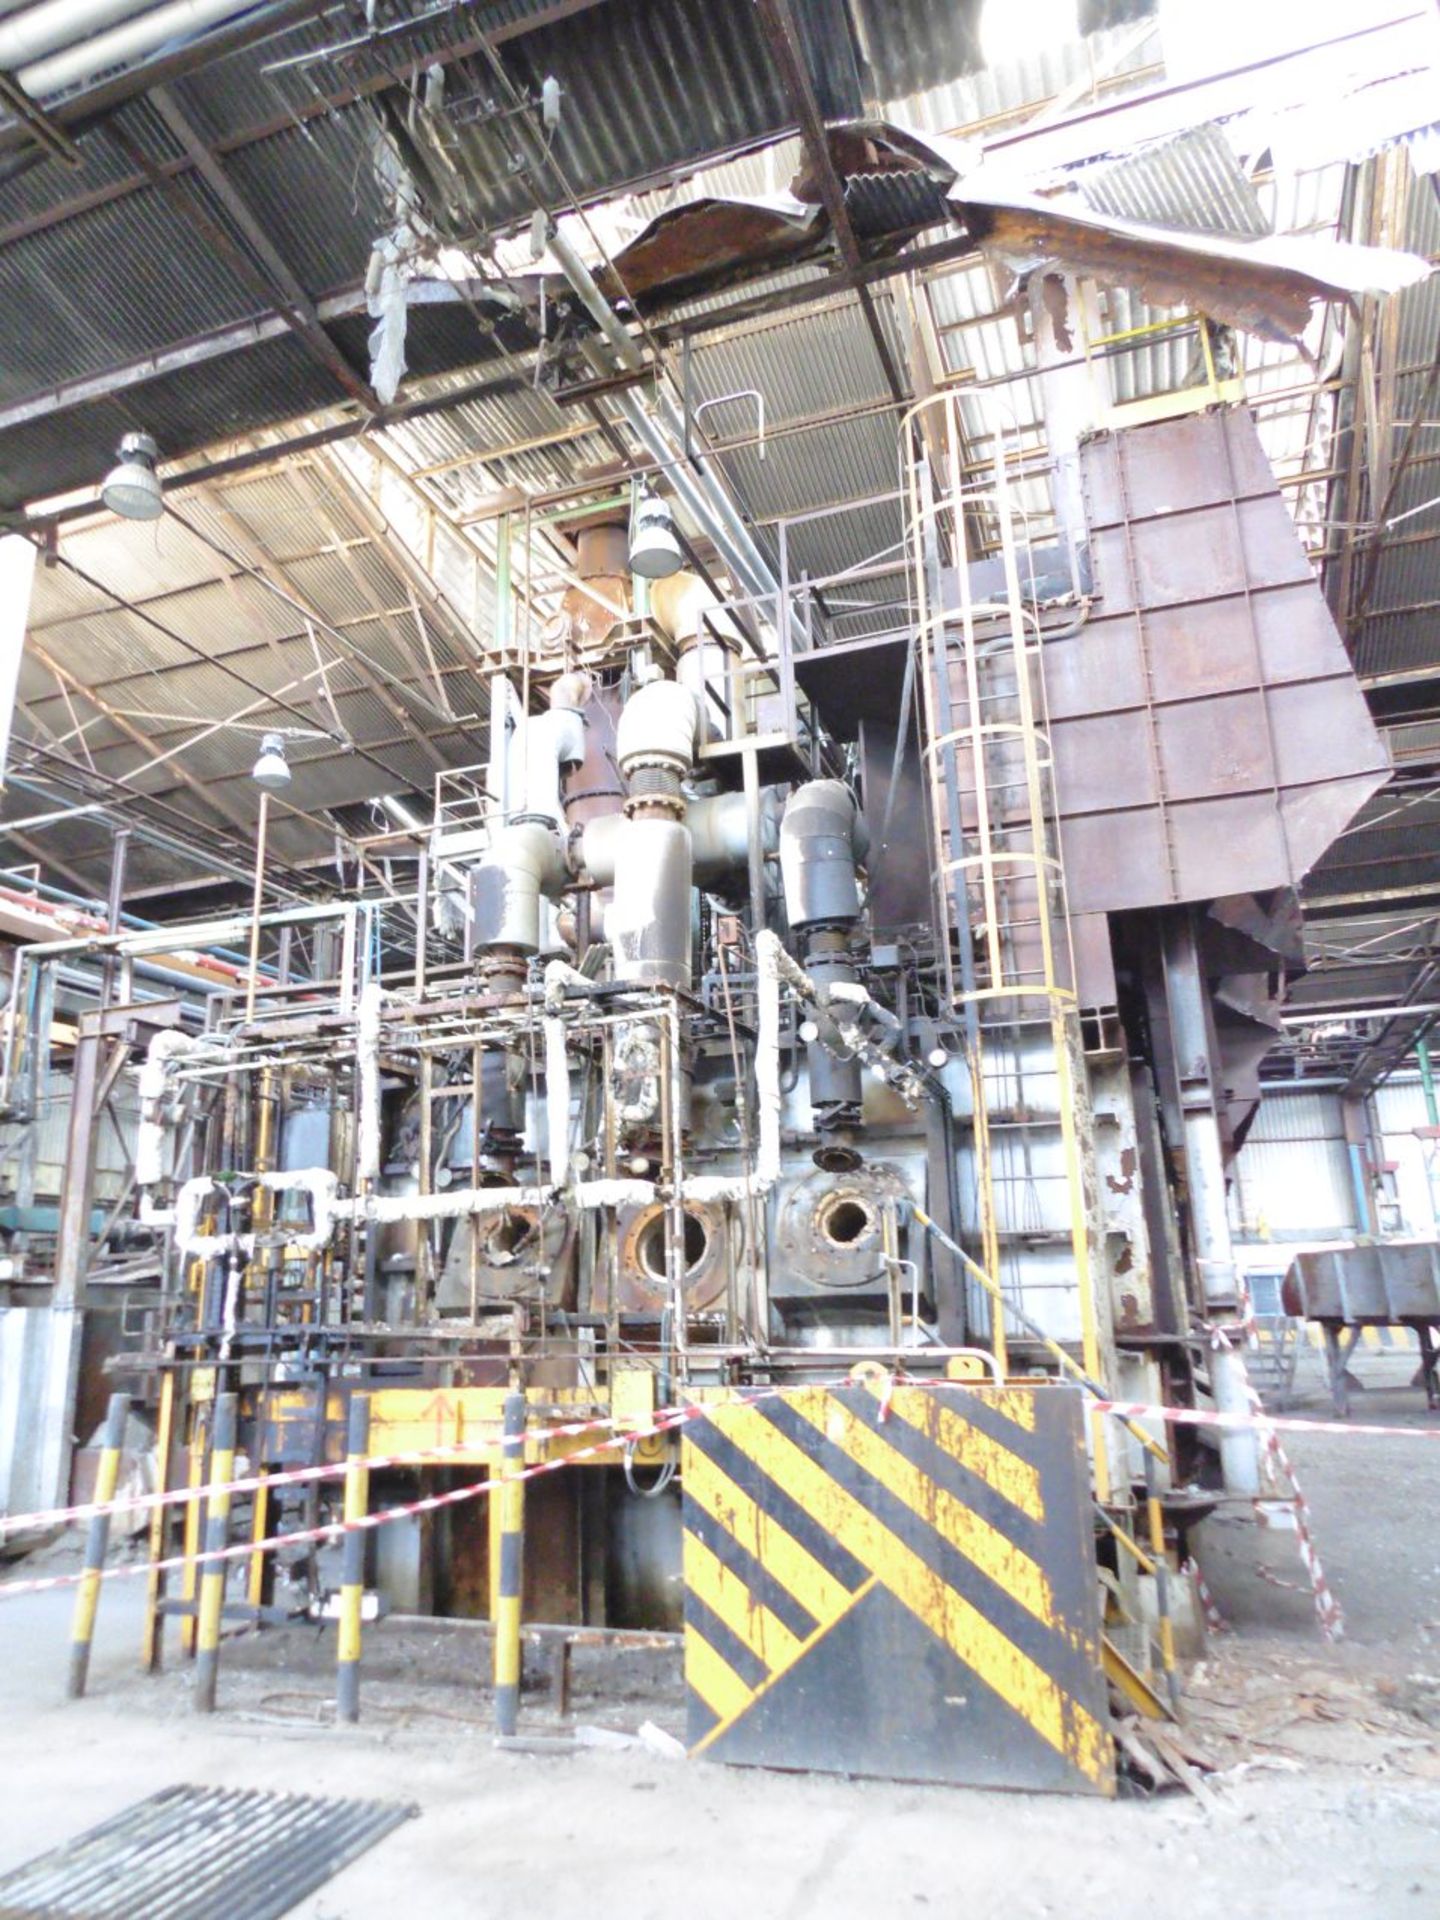 35 Ton and 30 Ton Aluminium Melting Furnaces; both with Low Sulphur Oil Burner Combustion Systems - Image 3 of 6